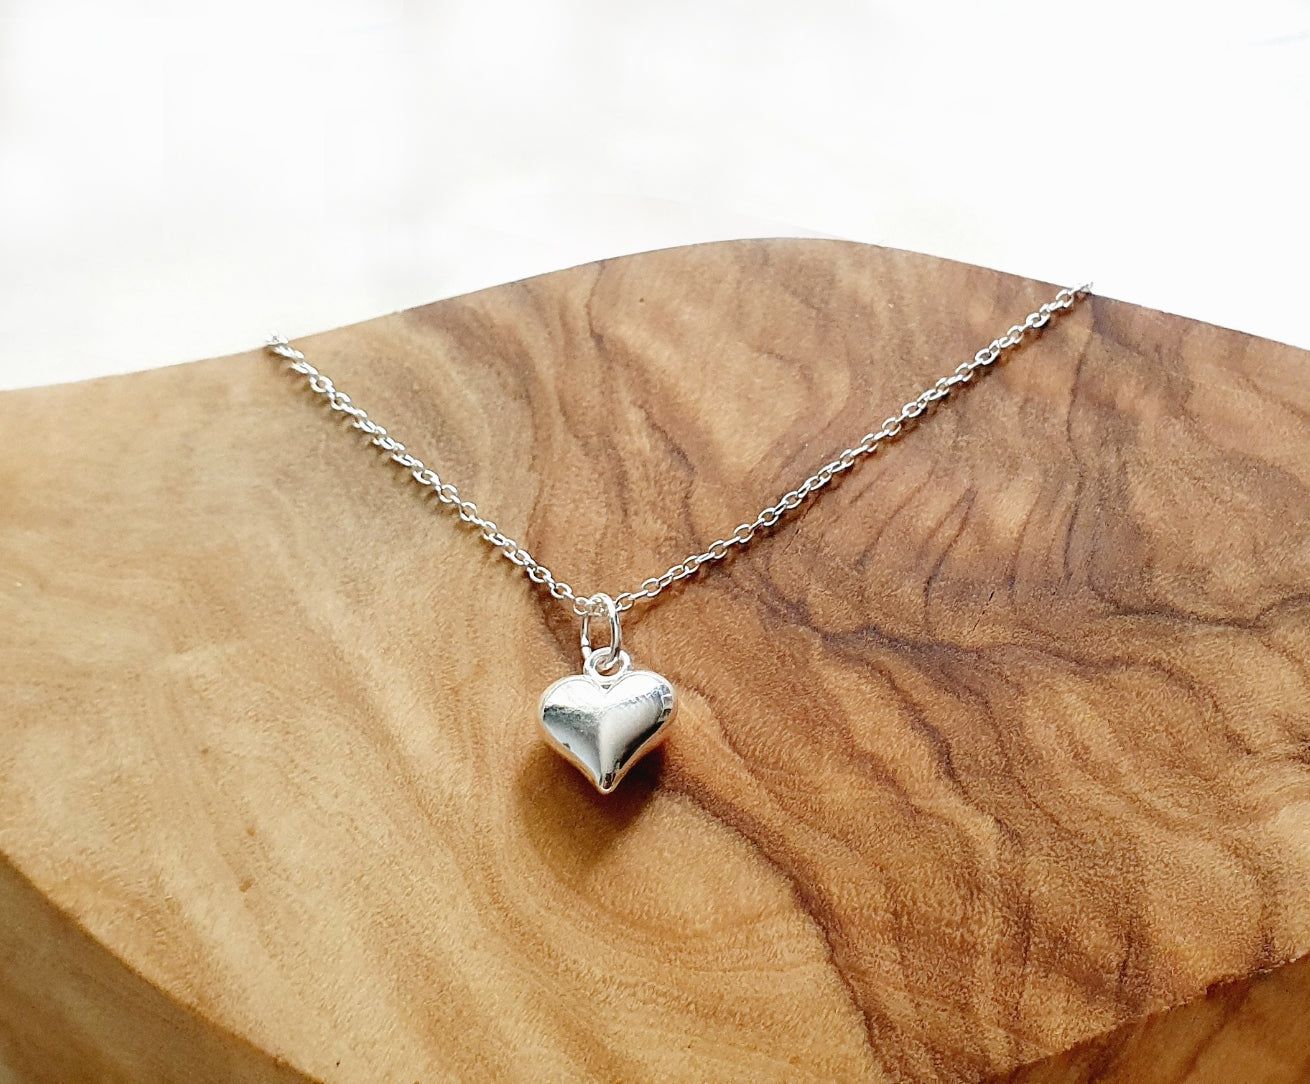 Niece Puffy Heart Necklace in Sterling Silver 925, Personalised Gift